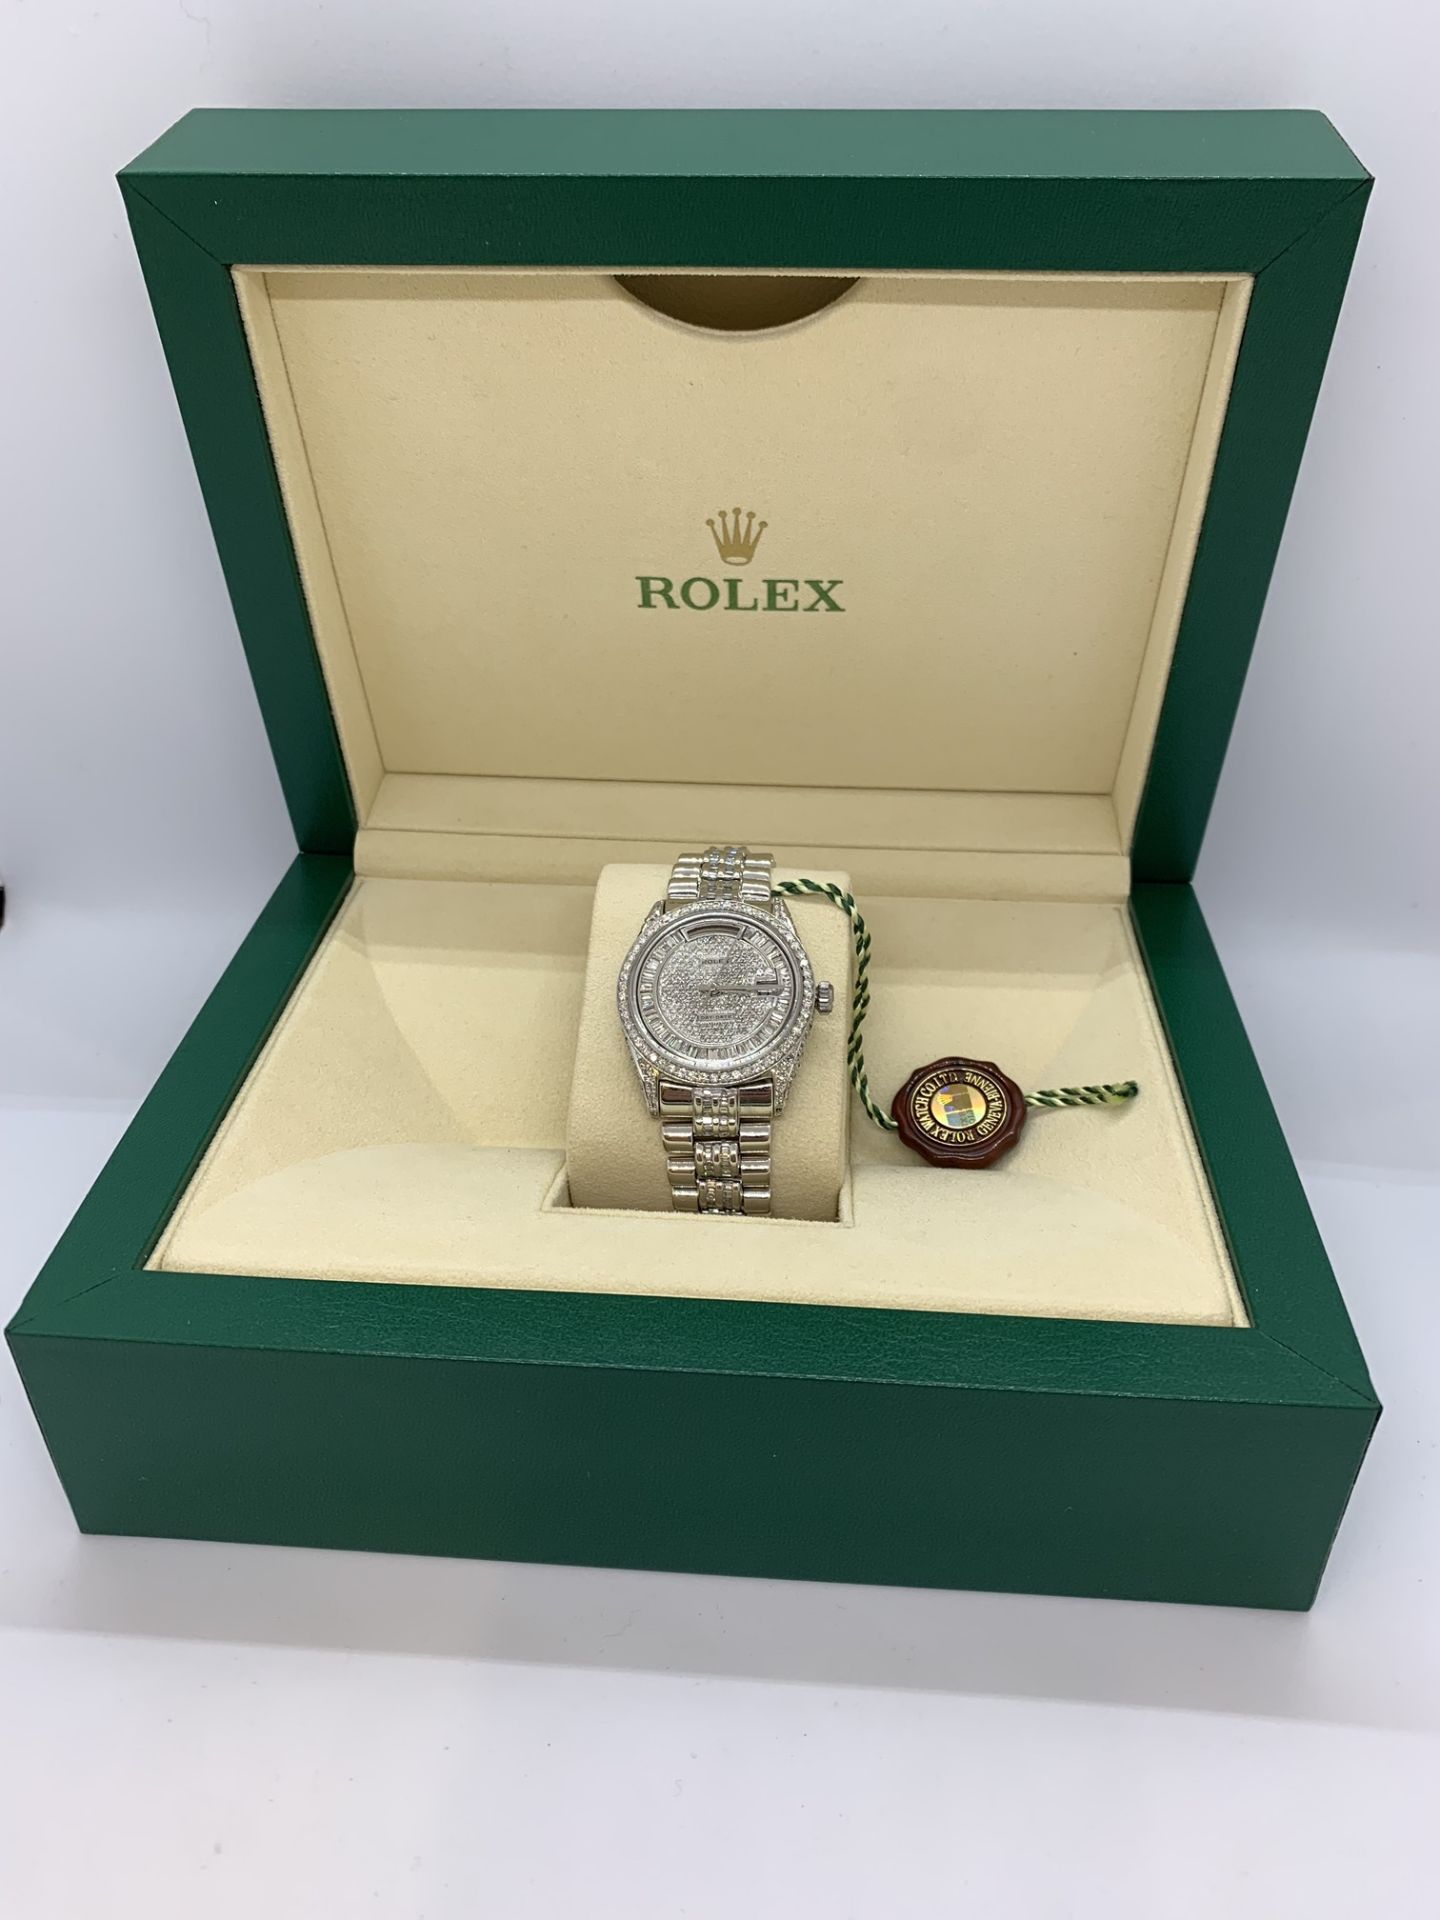 36mm DIAMOND SET DAY-DATE WATCH MARKED ROLEX SET IN WHITE METAL (TESTED AS GOLD) - Image 2 of 15